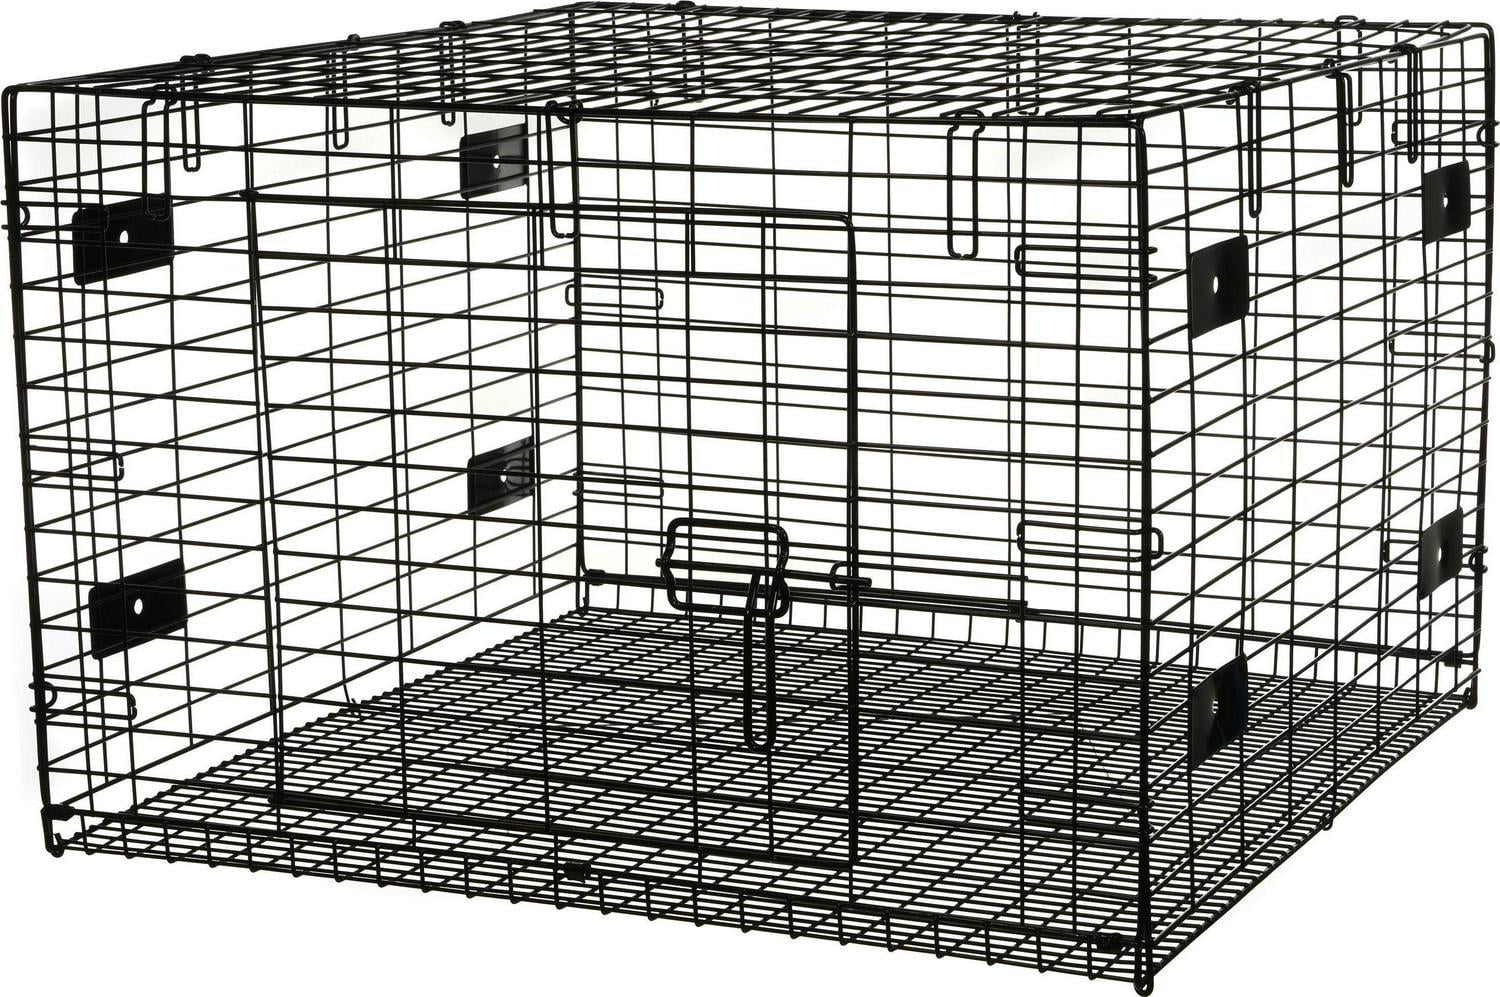 DuMOR Plastic Rabbit Cage Tray, 24 in. x 24 in. at Tractor Supply Co.